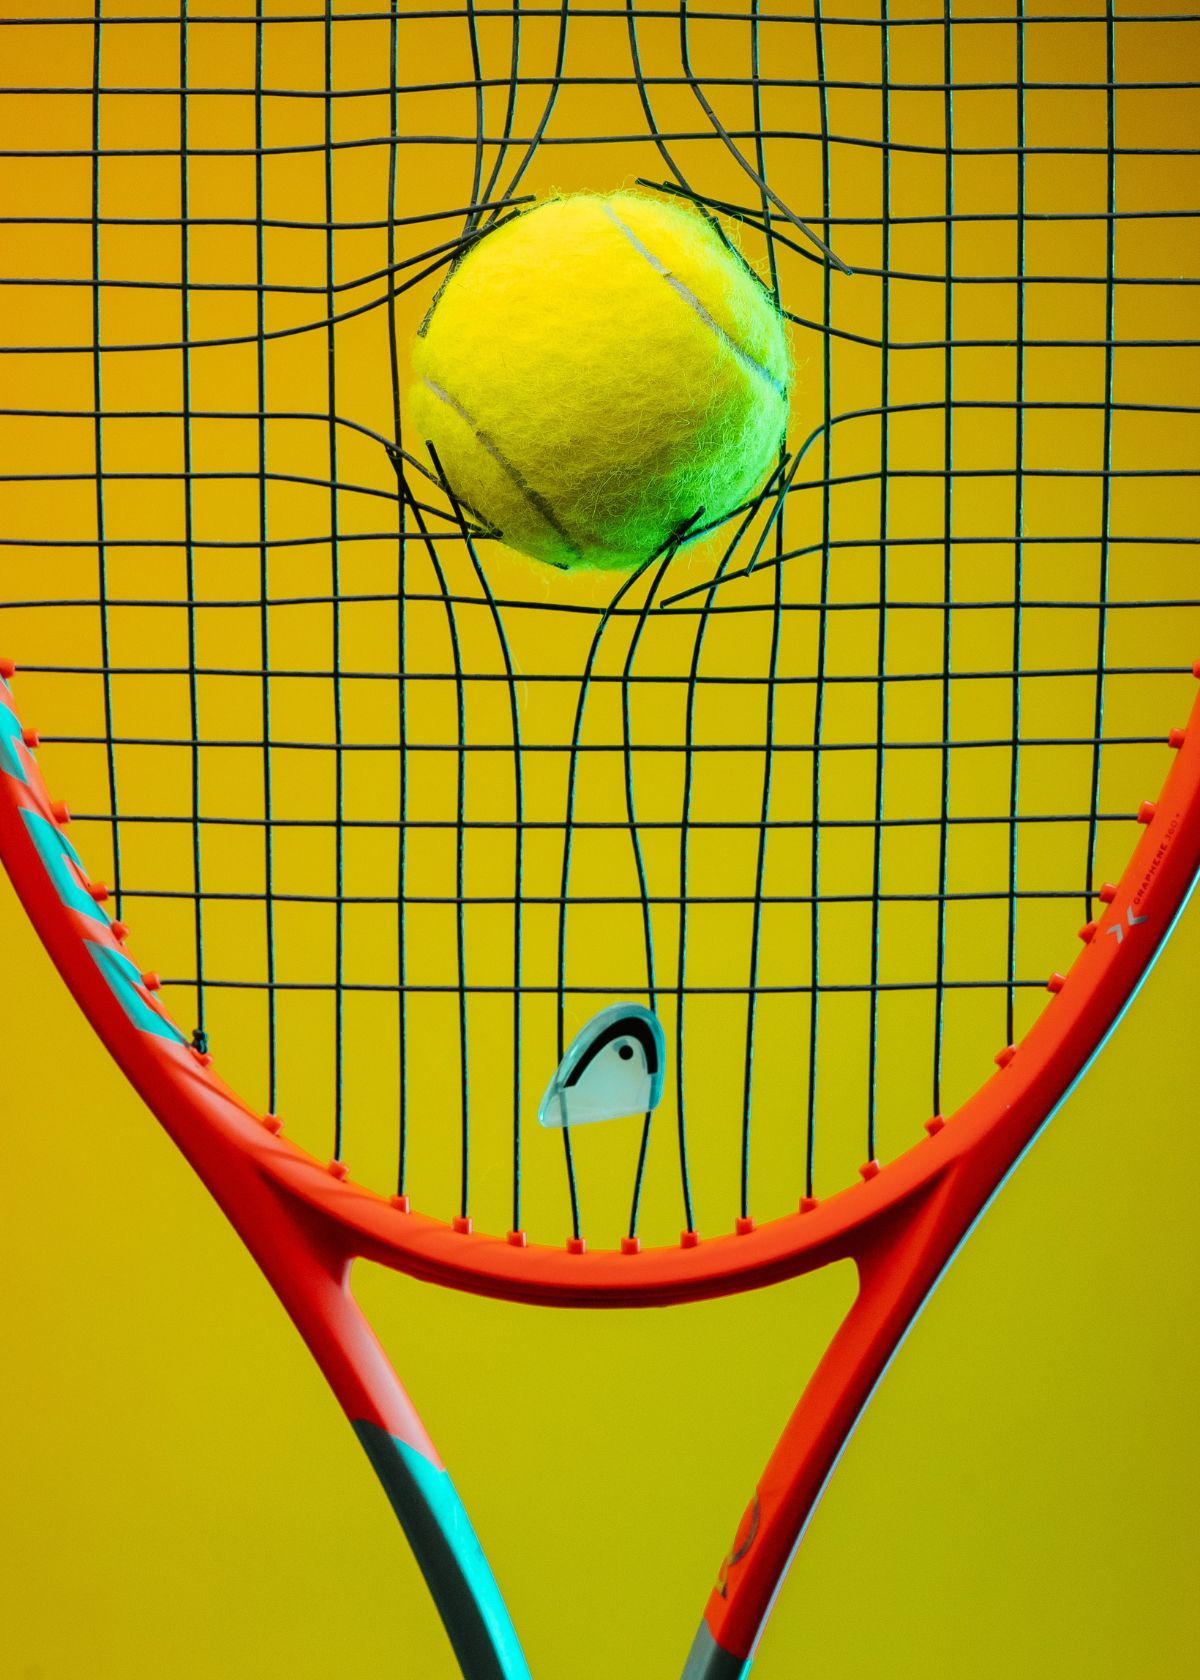 How Much Does it Cost to Restring a Tennis Racket?